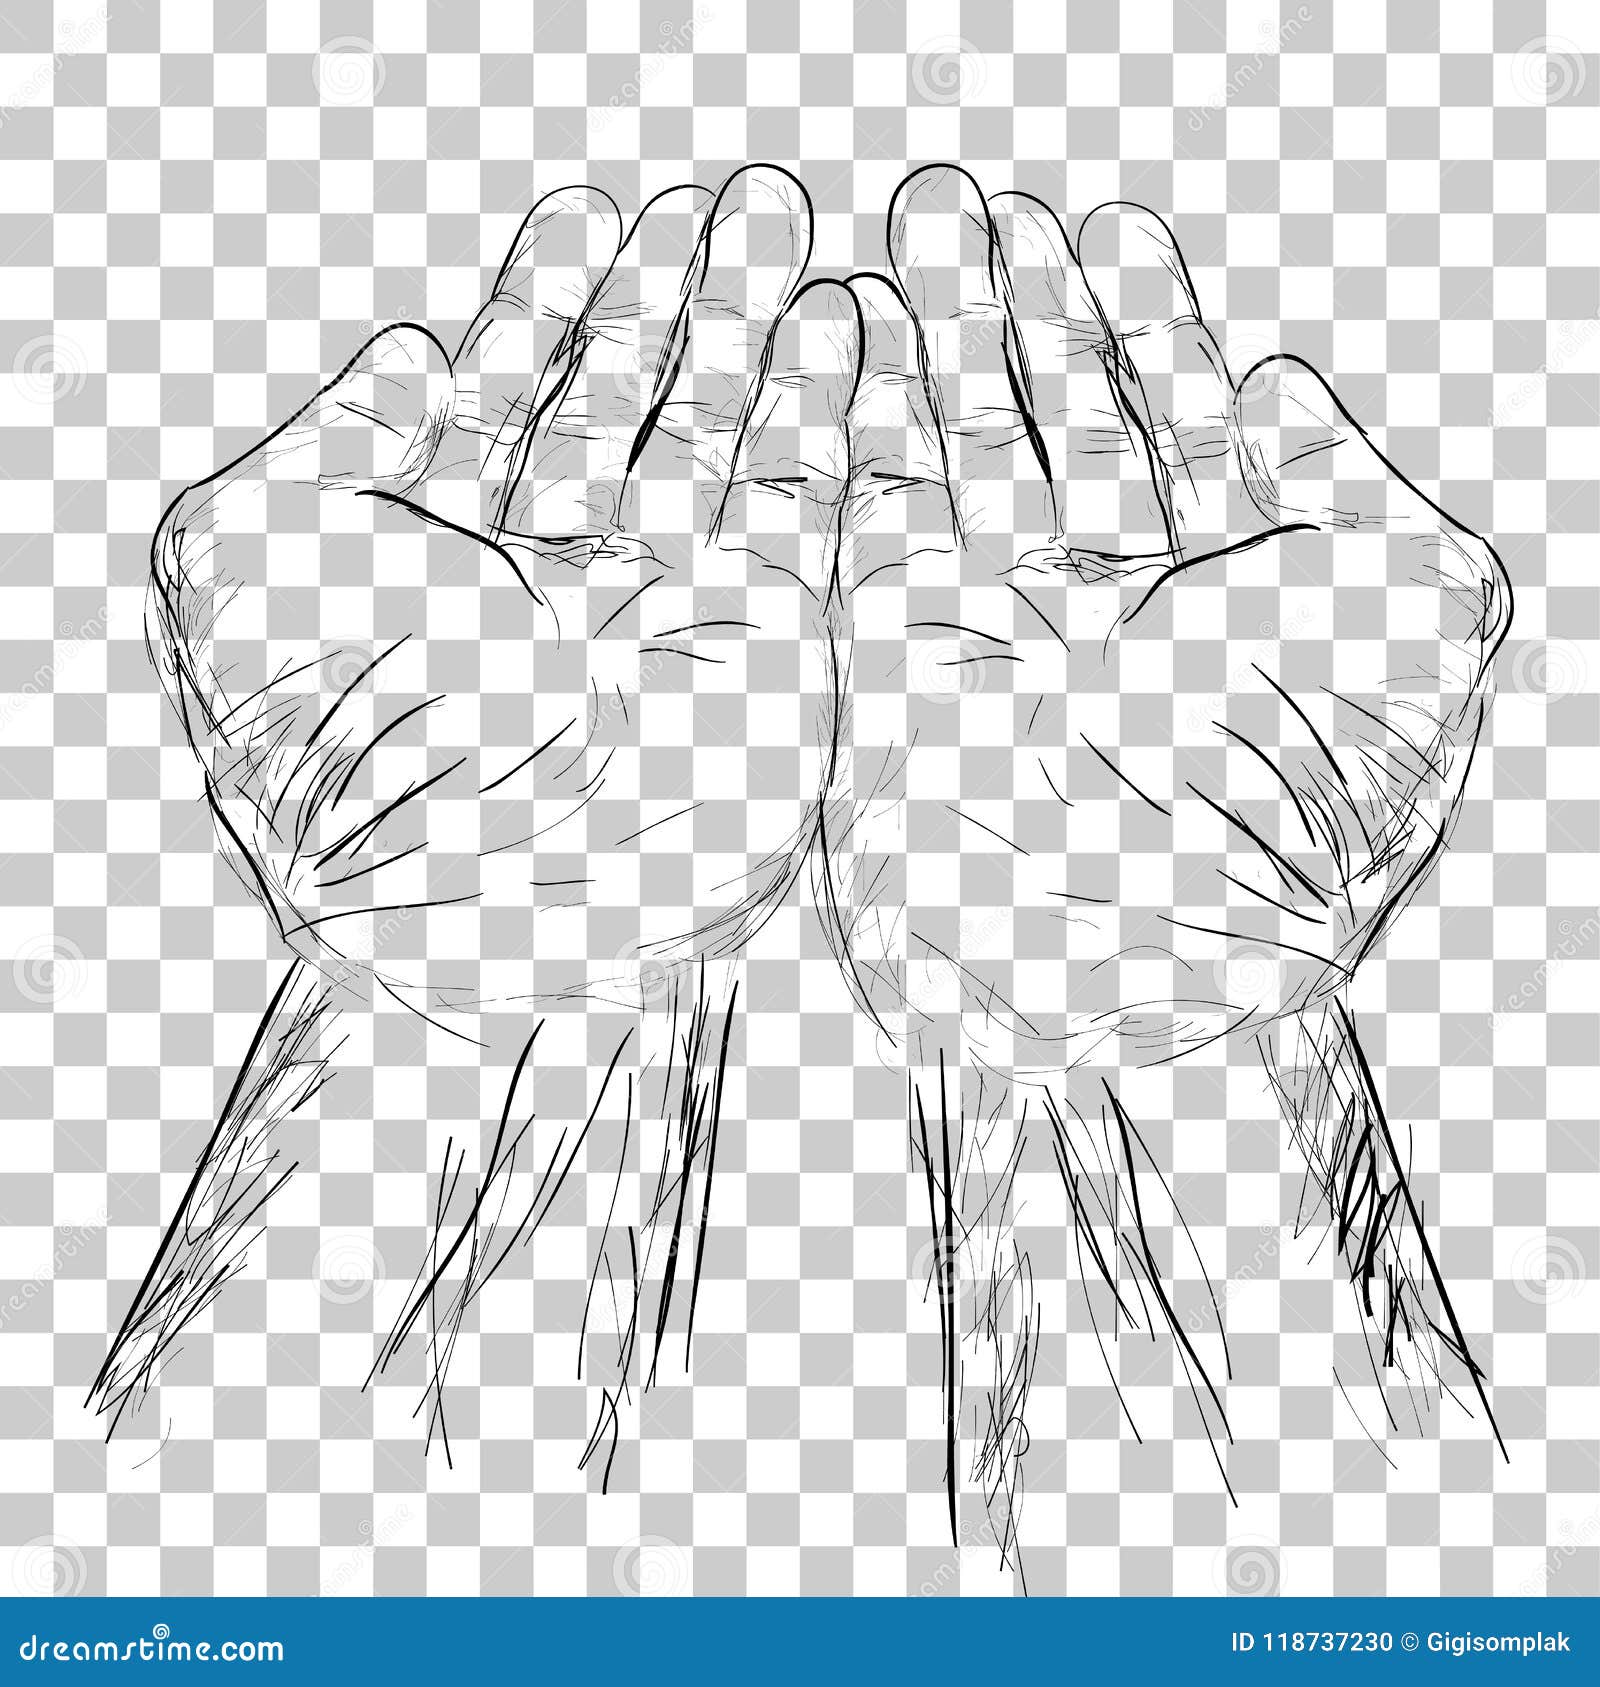 Simple Hand Draw Sketch Praying Hand Stock Vector - Illustration of ...